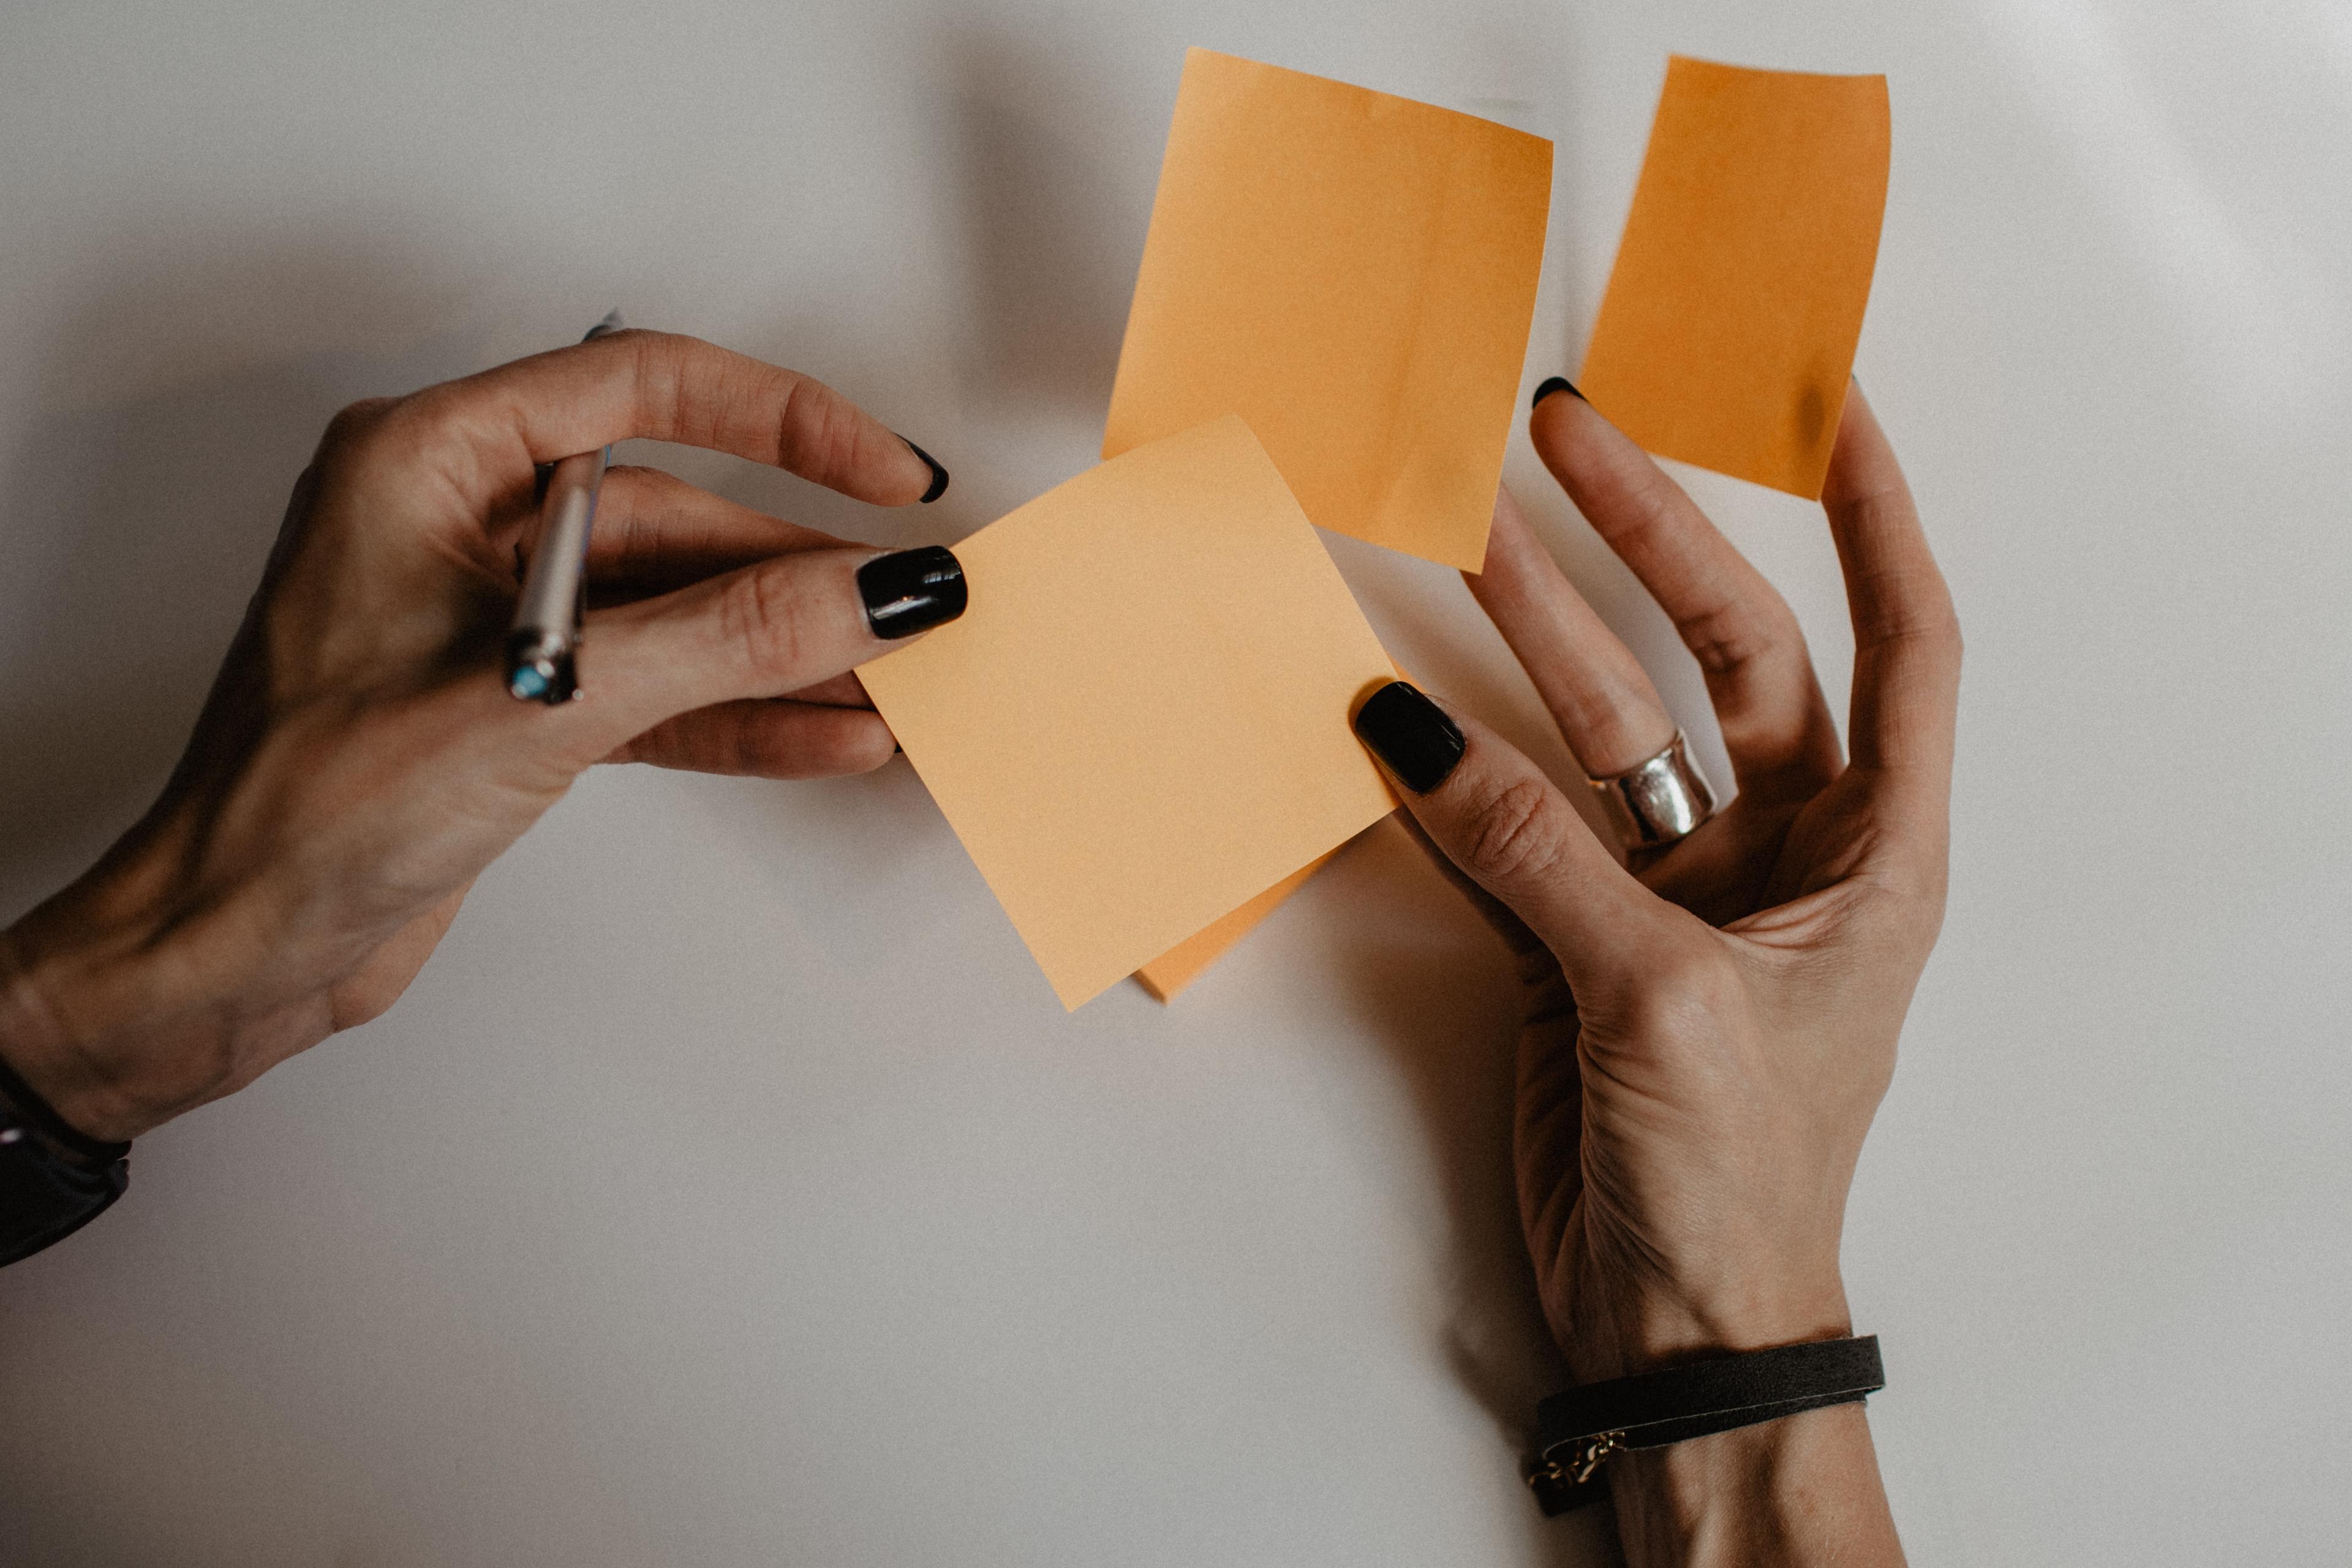 Orange post-it notes (blank) in the hands of a lady with black nails holding a pen.